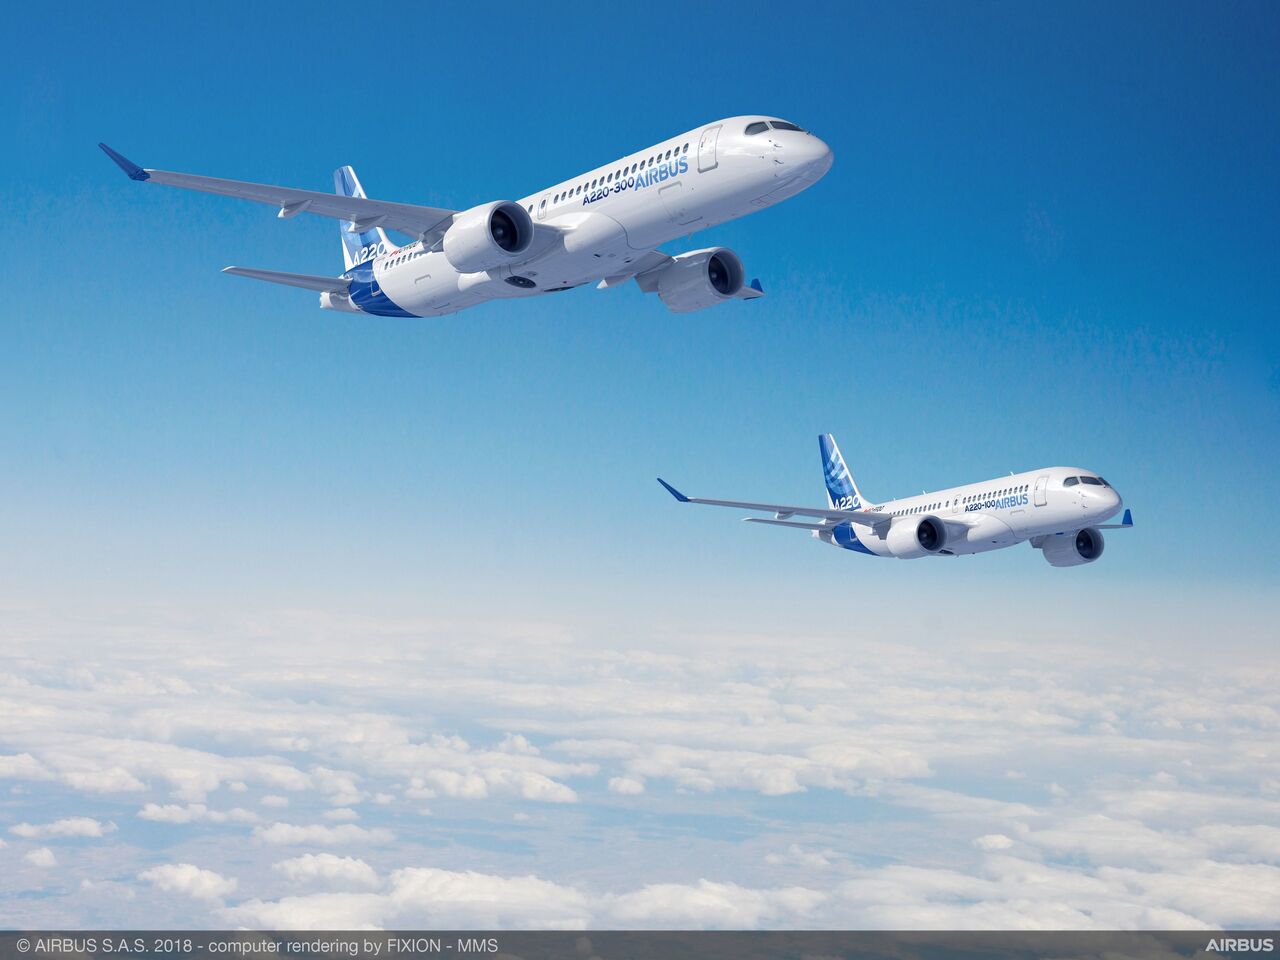 Two Airbus A220 aircraft in flight.